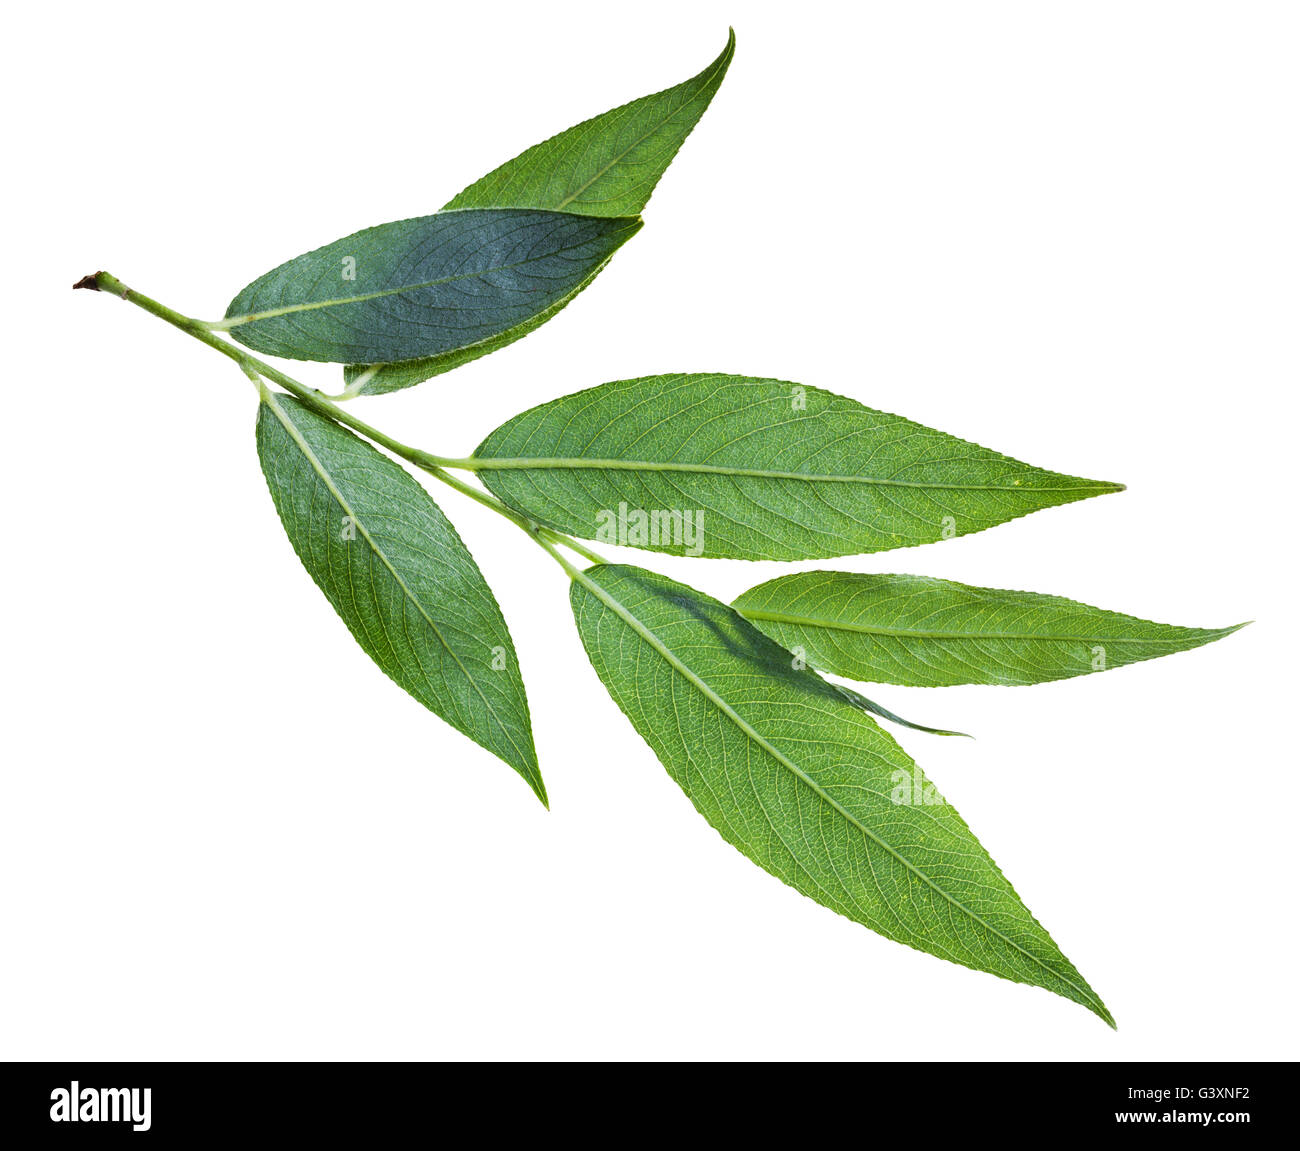 branch with green leaf (back side) of willow (Salix acutifolia, sharp-leaf willow) isolated on white background Stock Photo